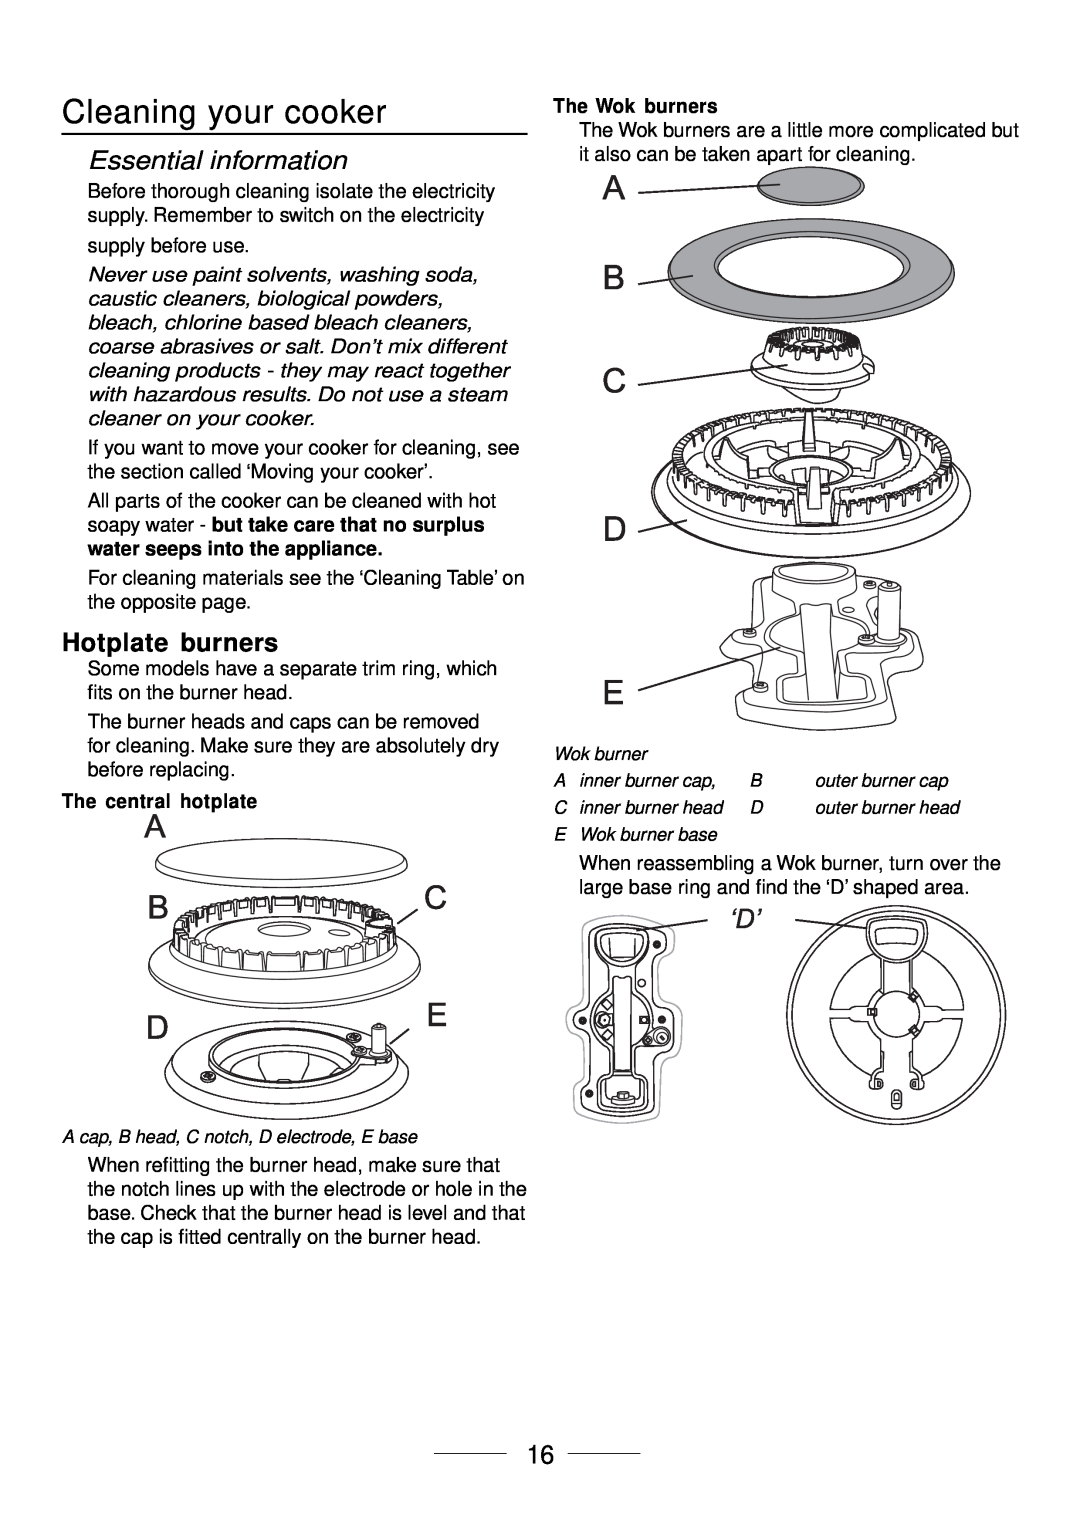 Maytag 110 installation instructions Cleaning your cooker, Hotplate burners, Essential information 